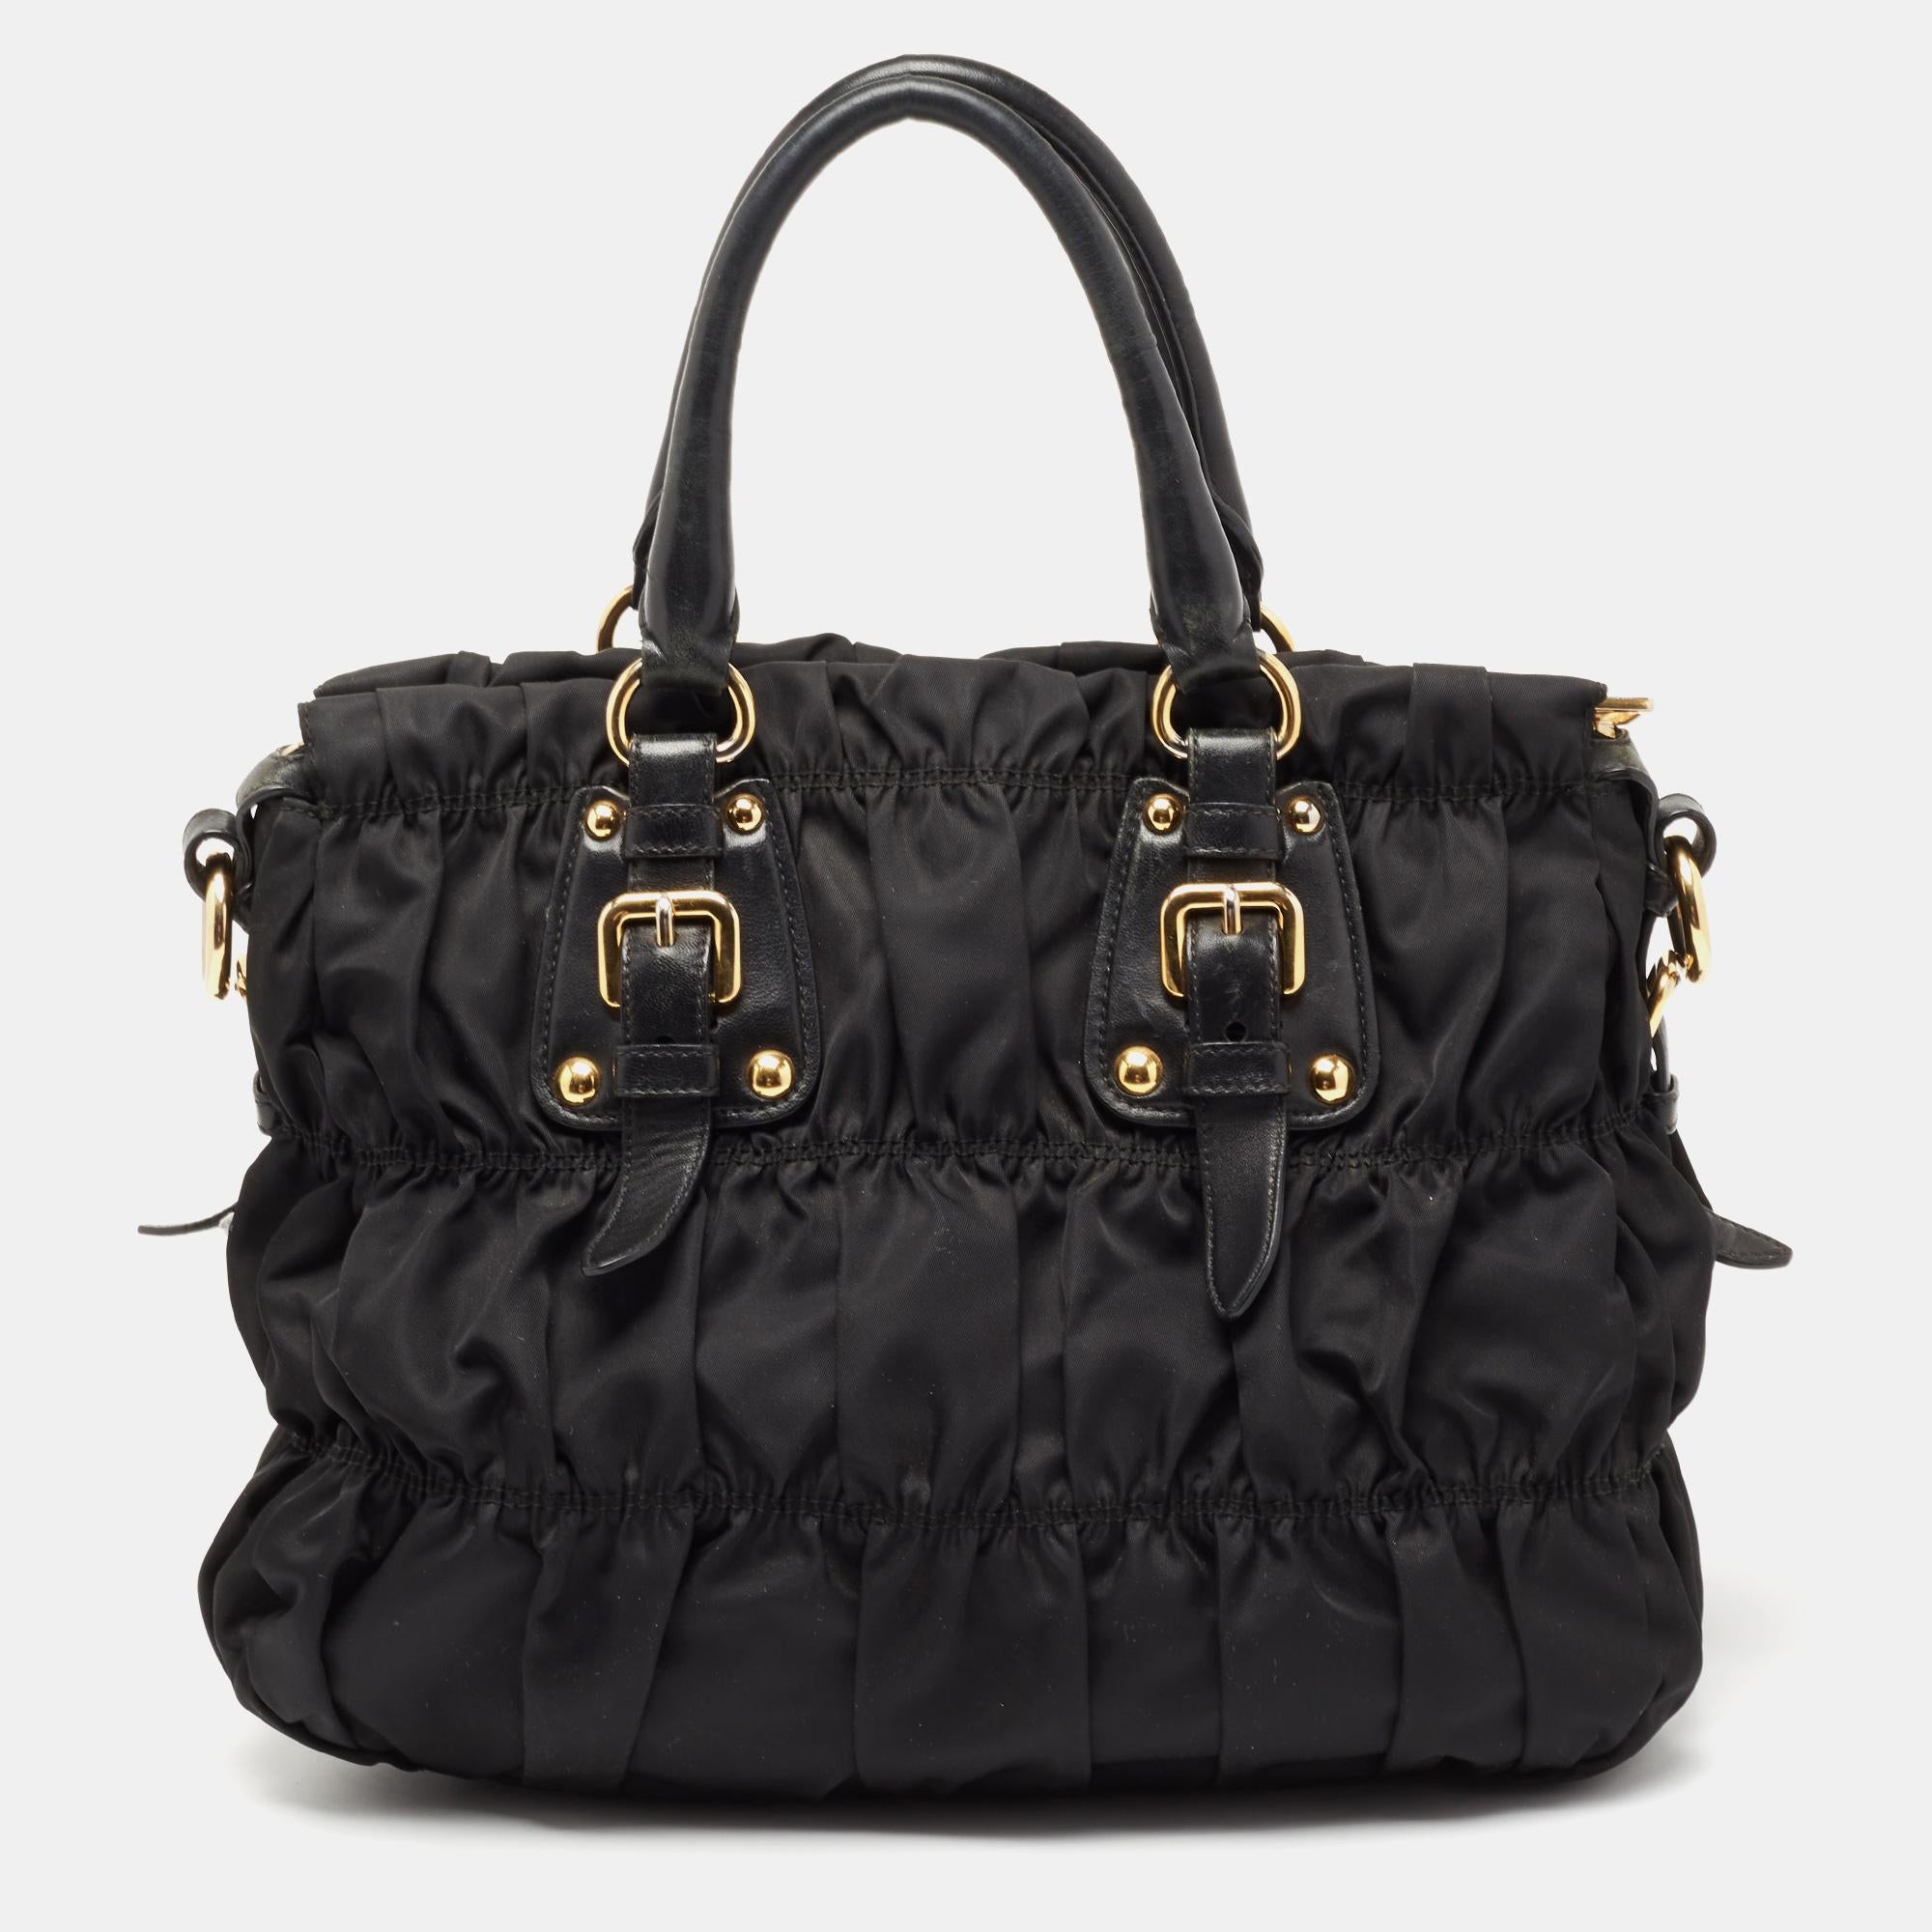 Carry your daily essentials in style in this Prada Gaufre ruched shopping bag. It comes crafted in fine materials. The exterior features double top handles and gold-tone detailing. The top zipper opens to a roomy interior and features a zipper